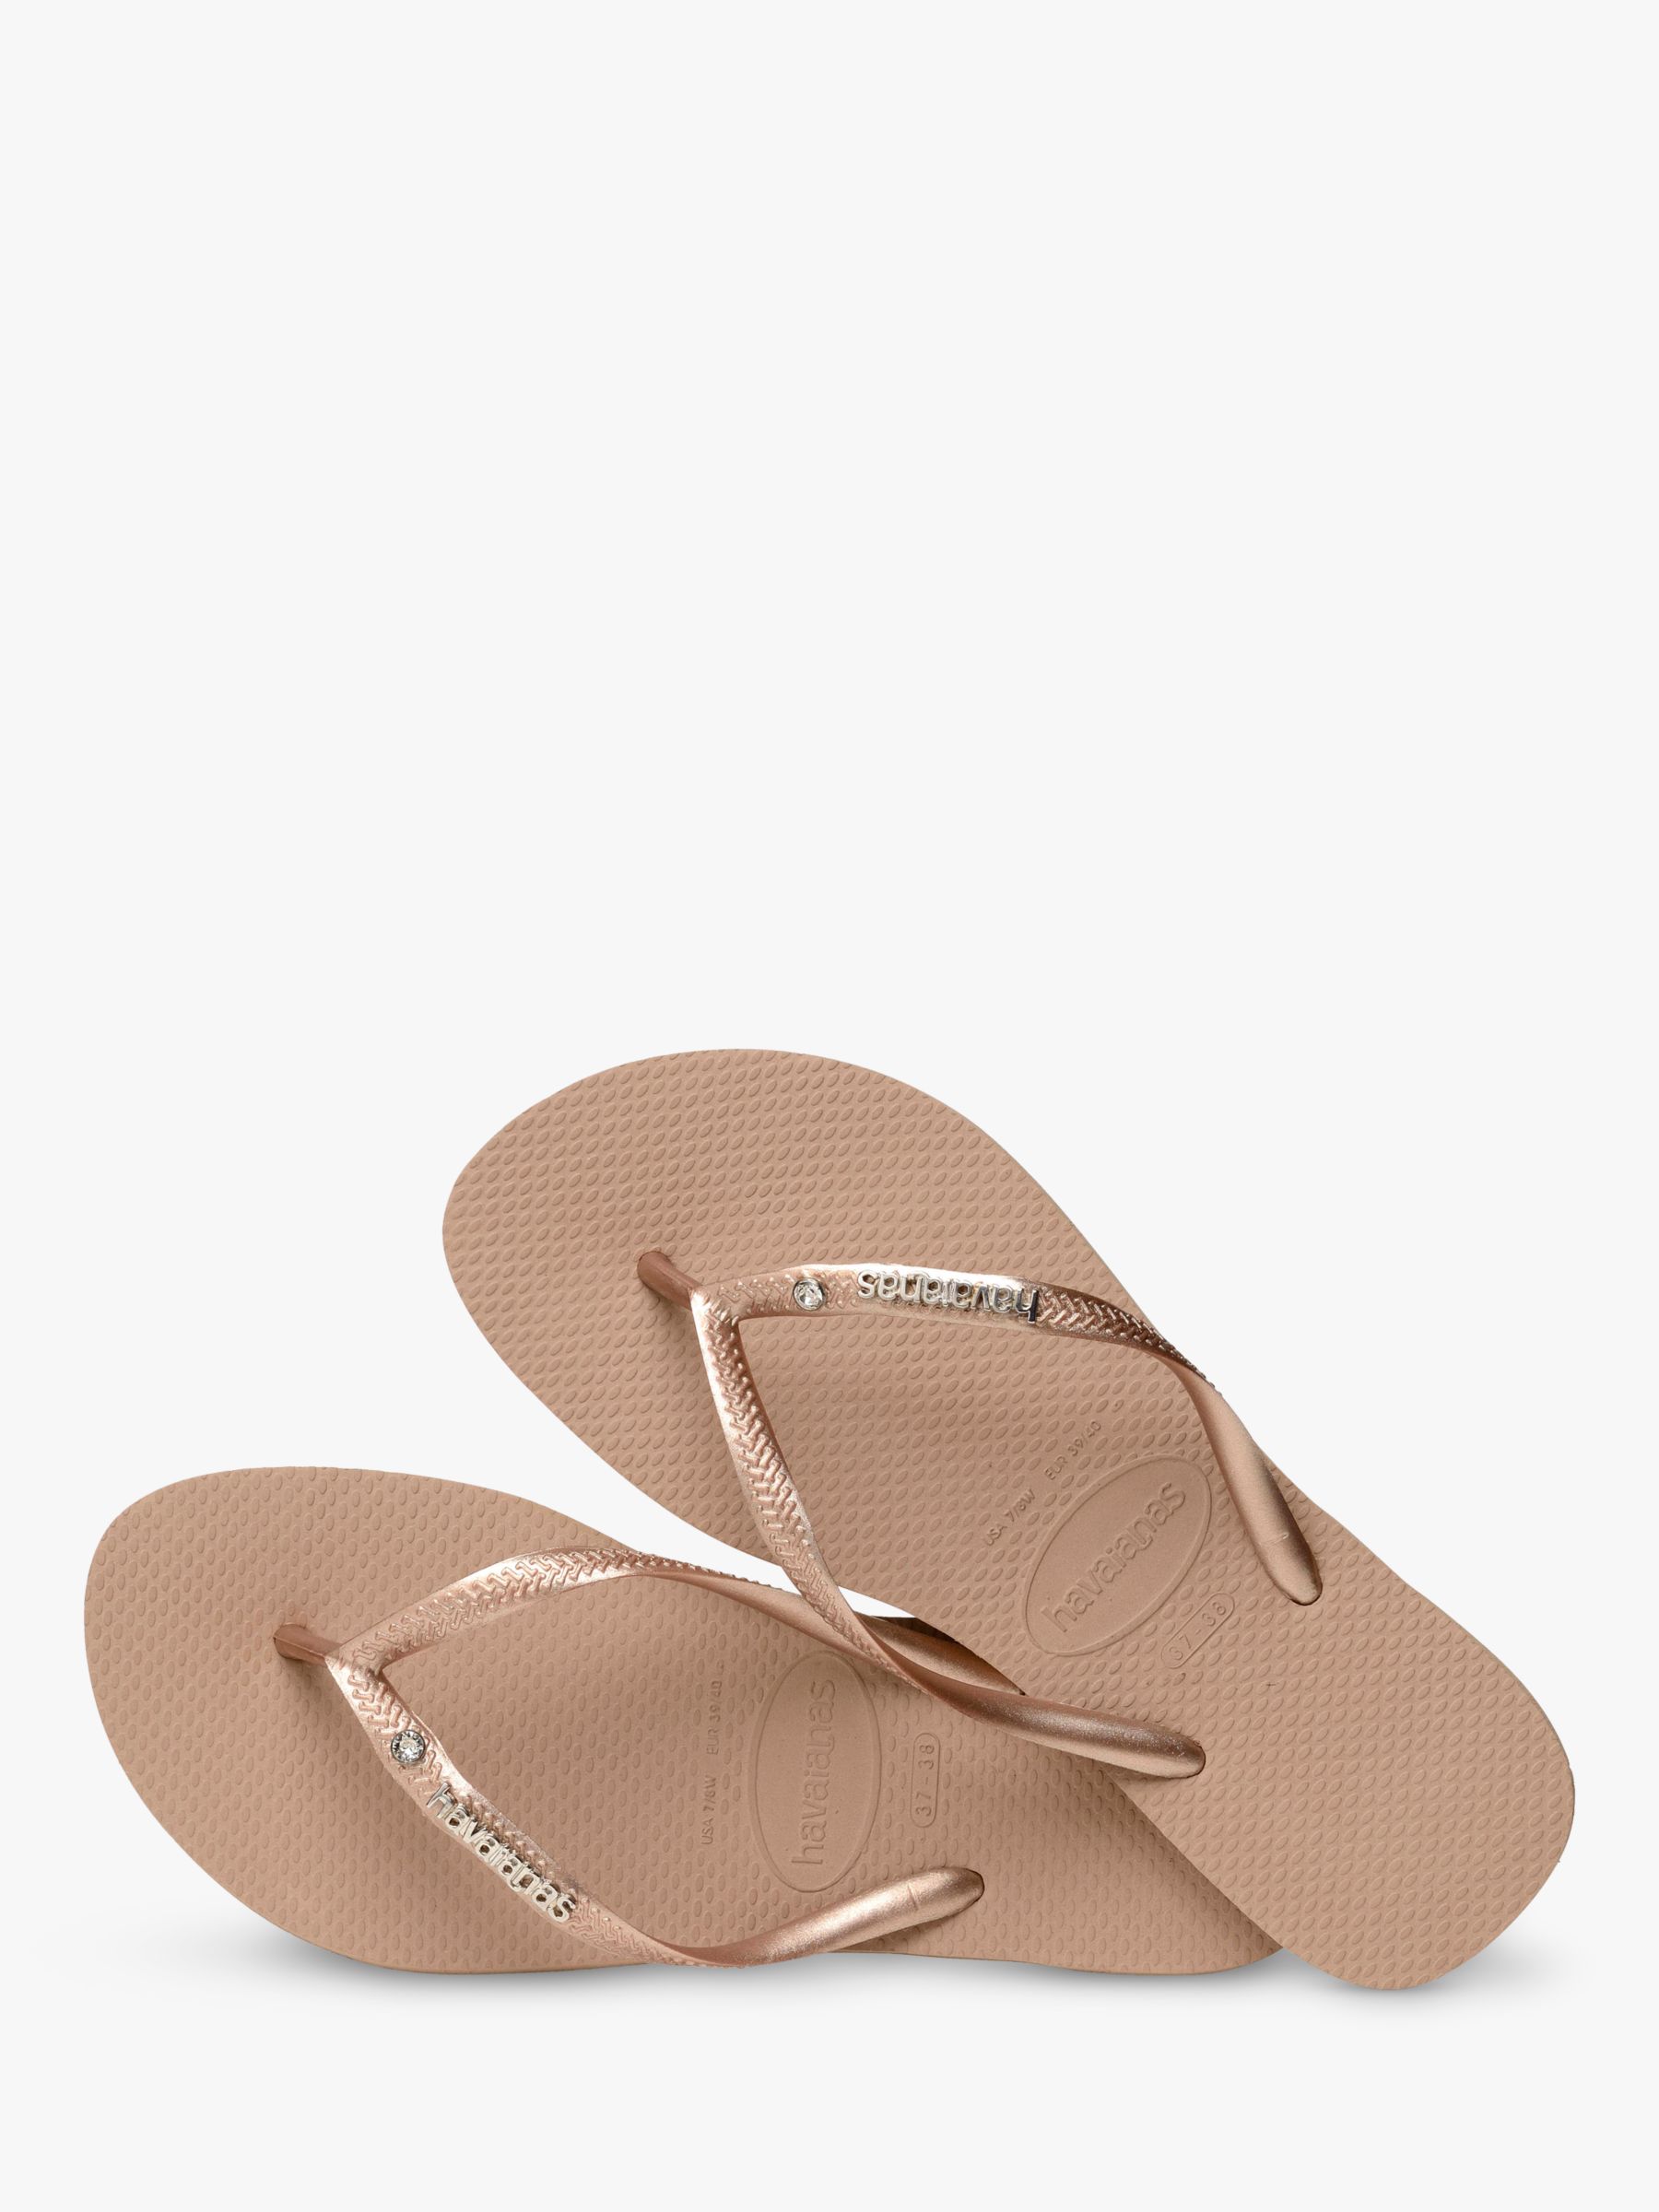 havaianas rose gold crystal